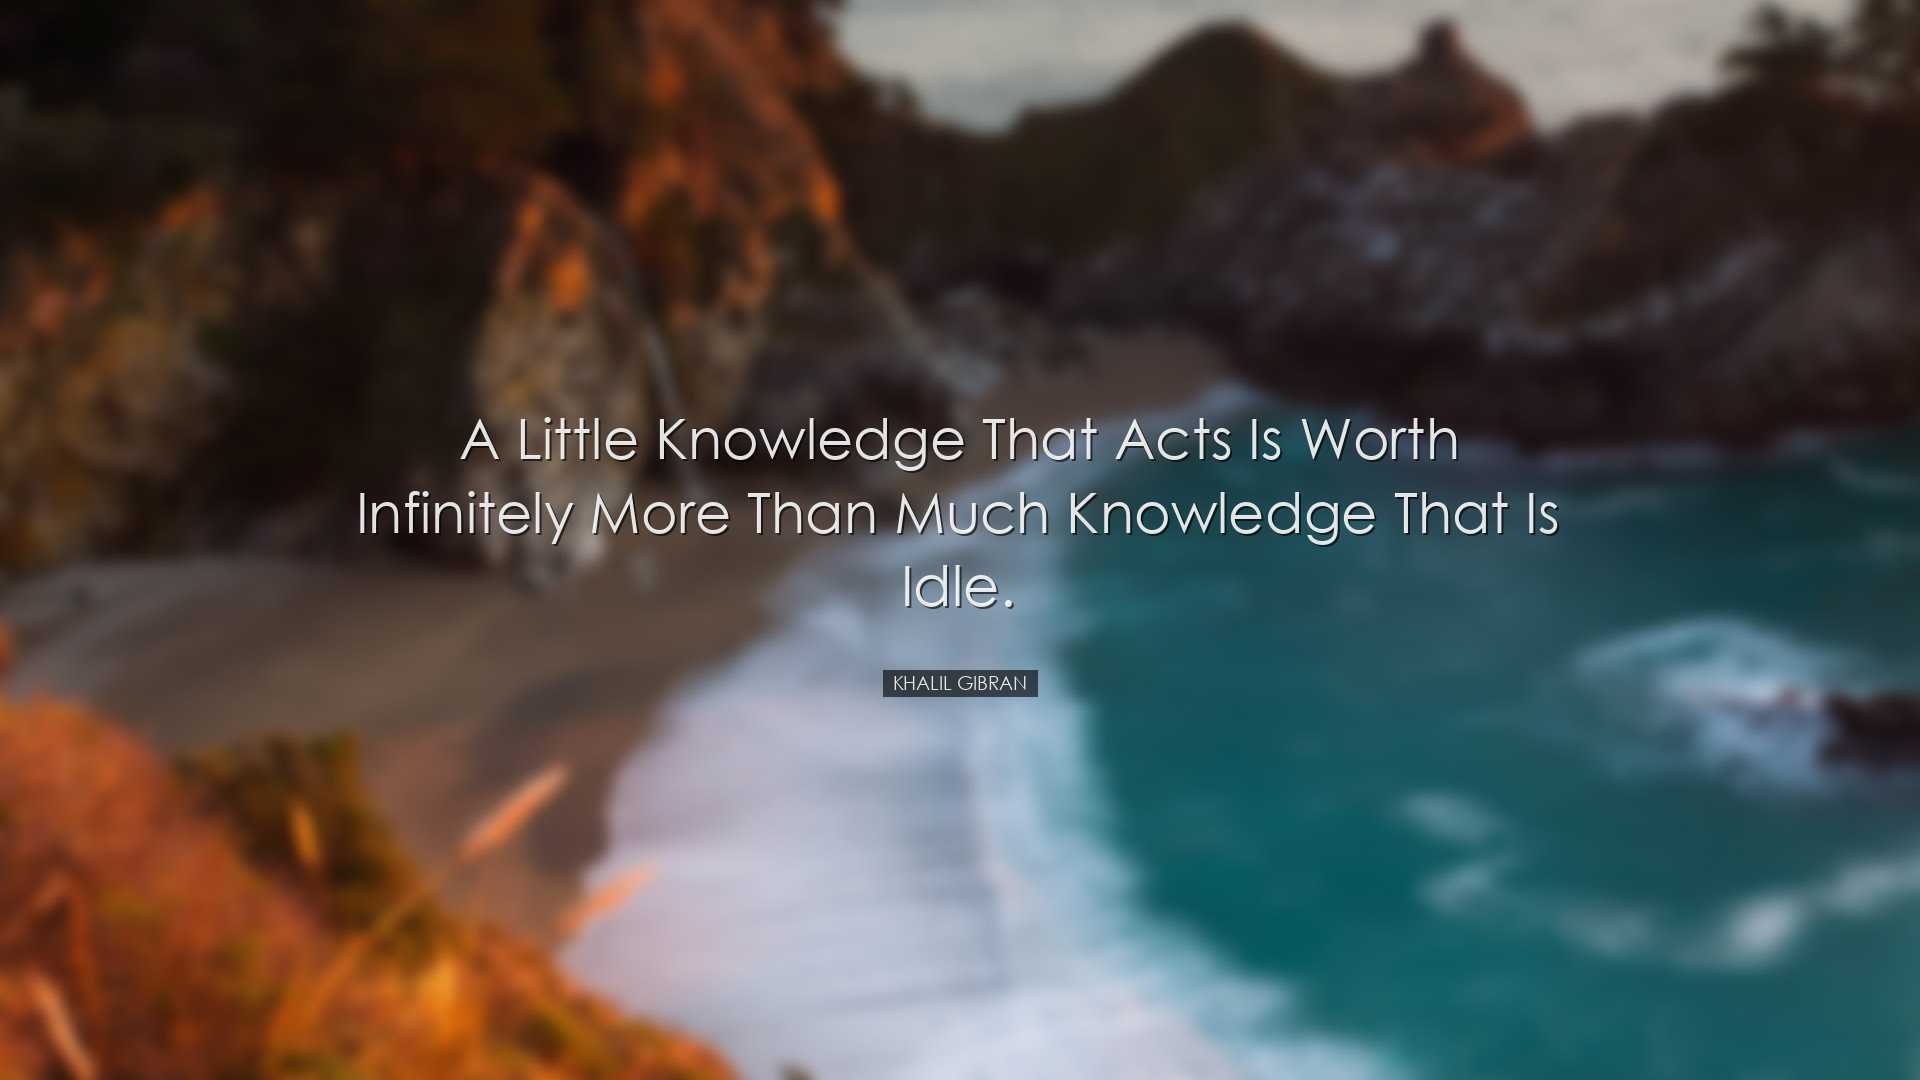 A little knowledge that acts is worth infinitely more than much kn